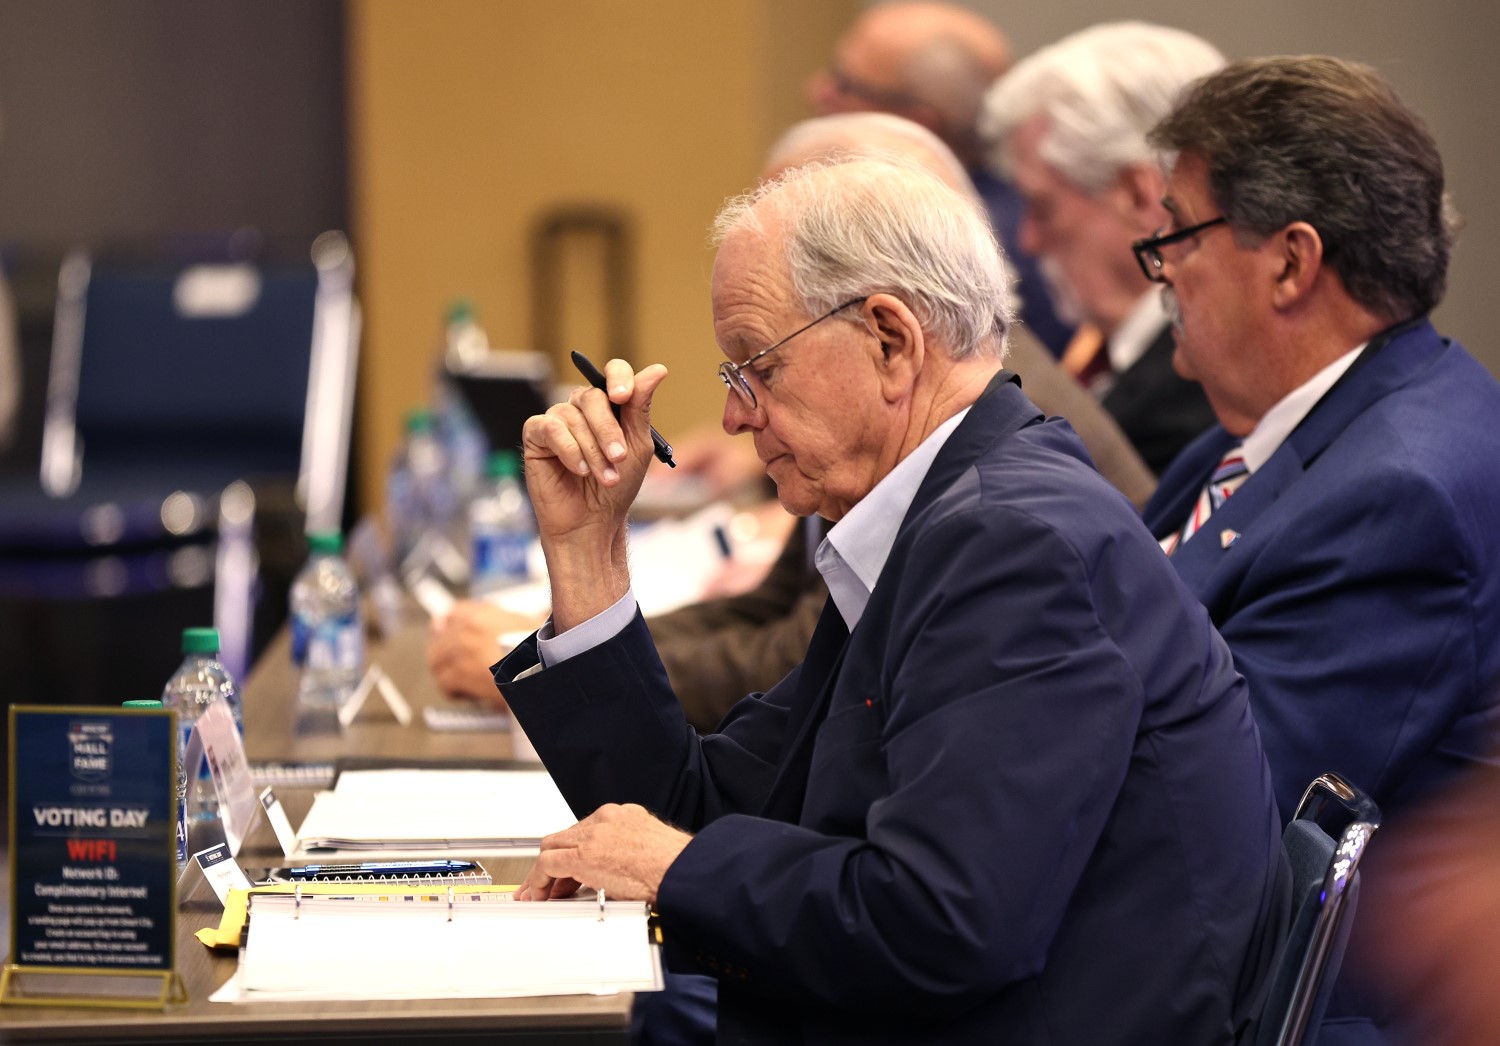 Jim France, Chairman and CEO of NASCAR, looks on during the NASCAR Hall of Fame Voting Day at Charlotte Convention Center on August 02, 2023 in Charlotte, North Carolina. (Photo by Jared C. Tilton/Getty Images)